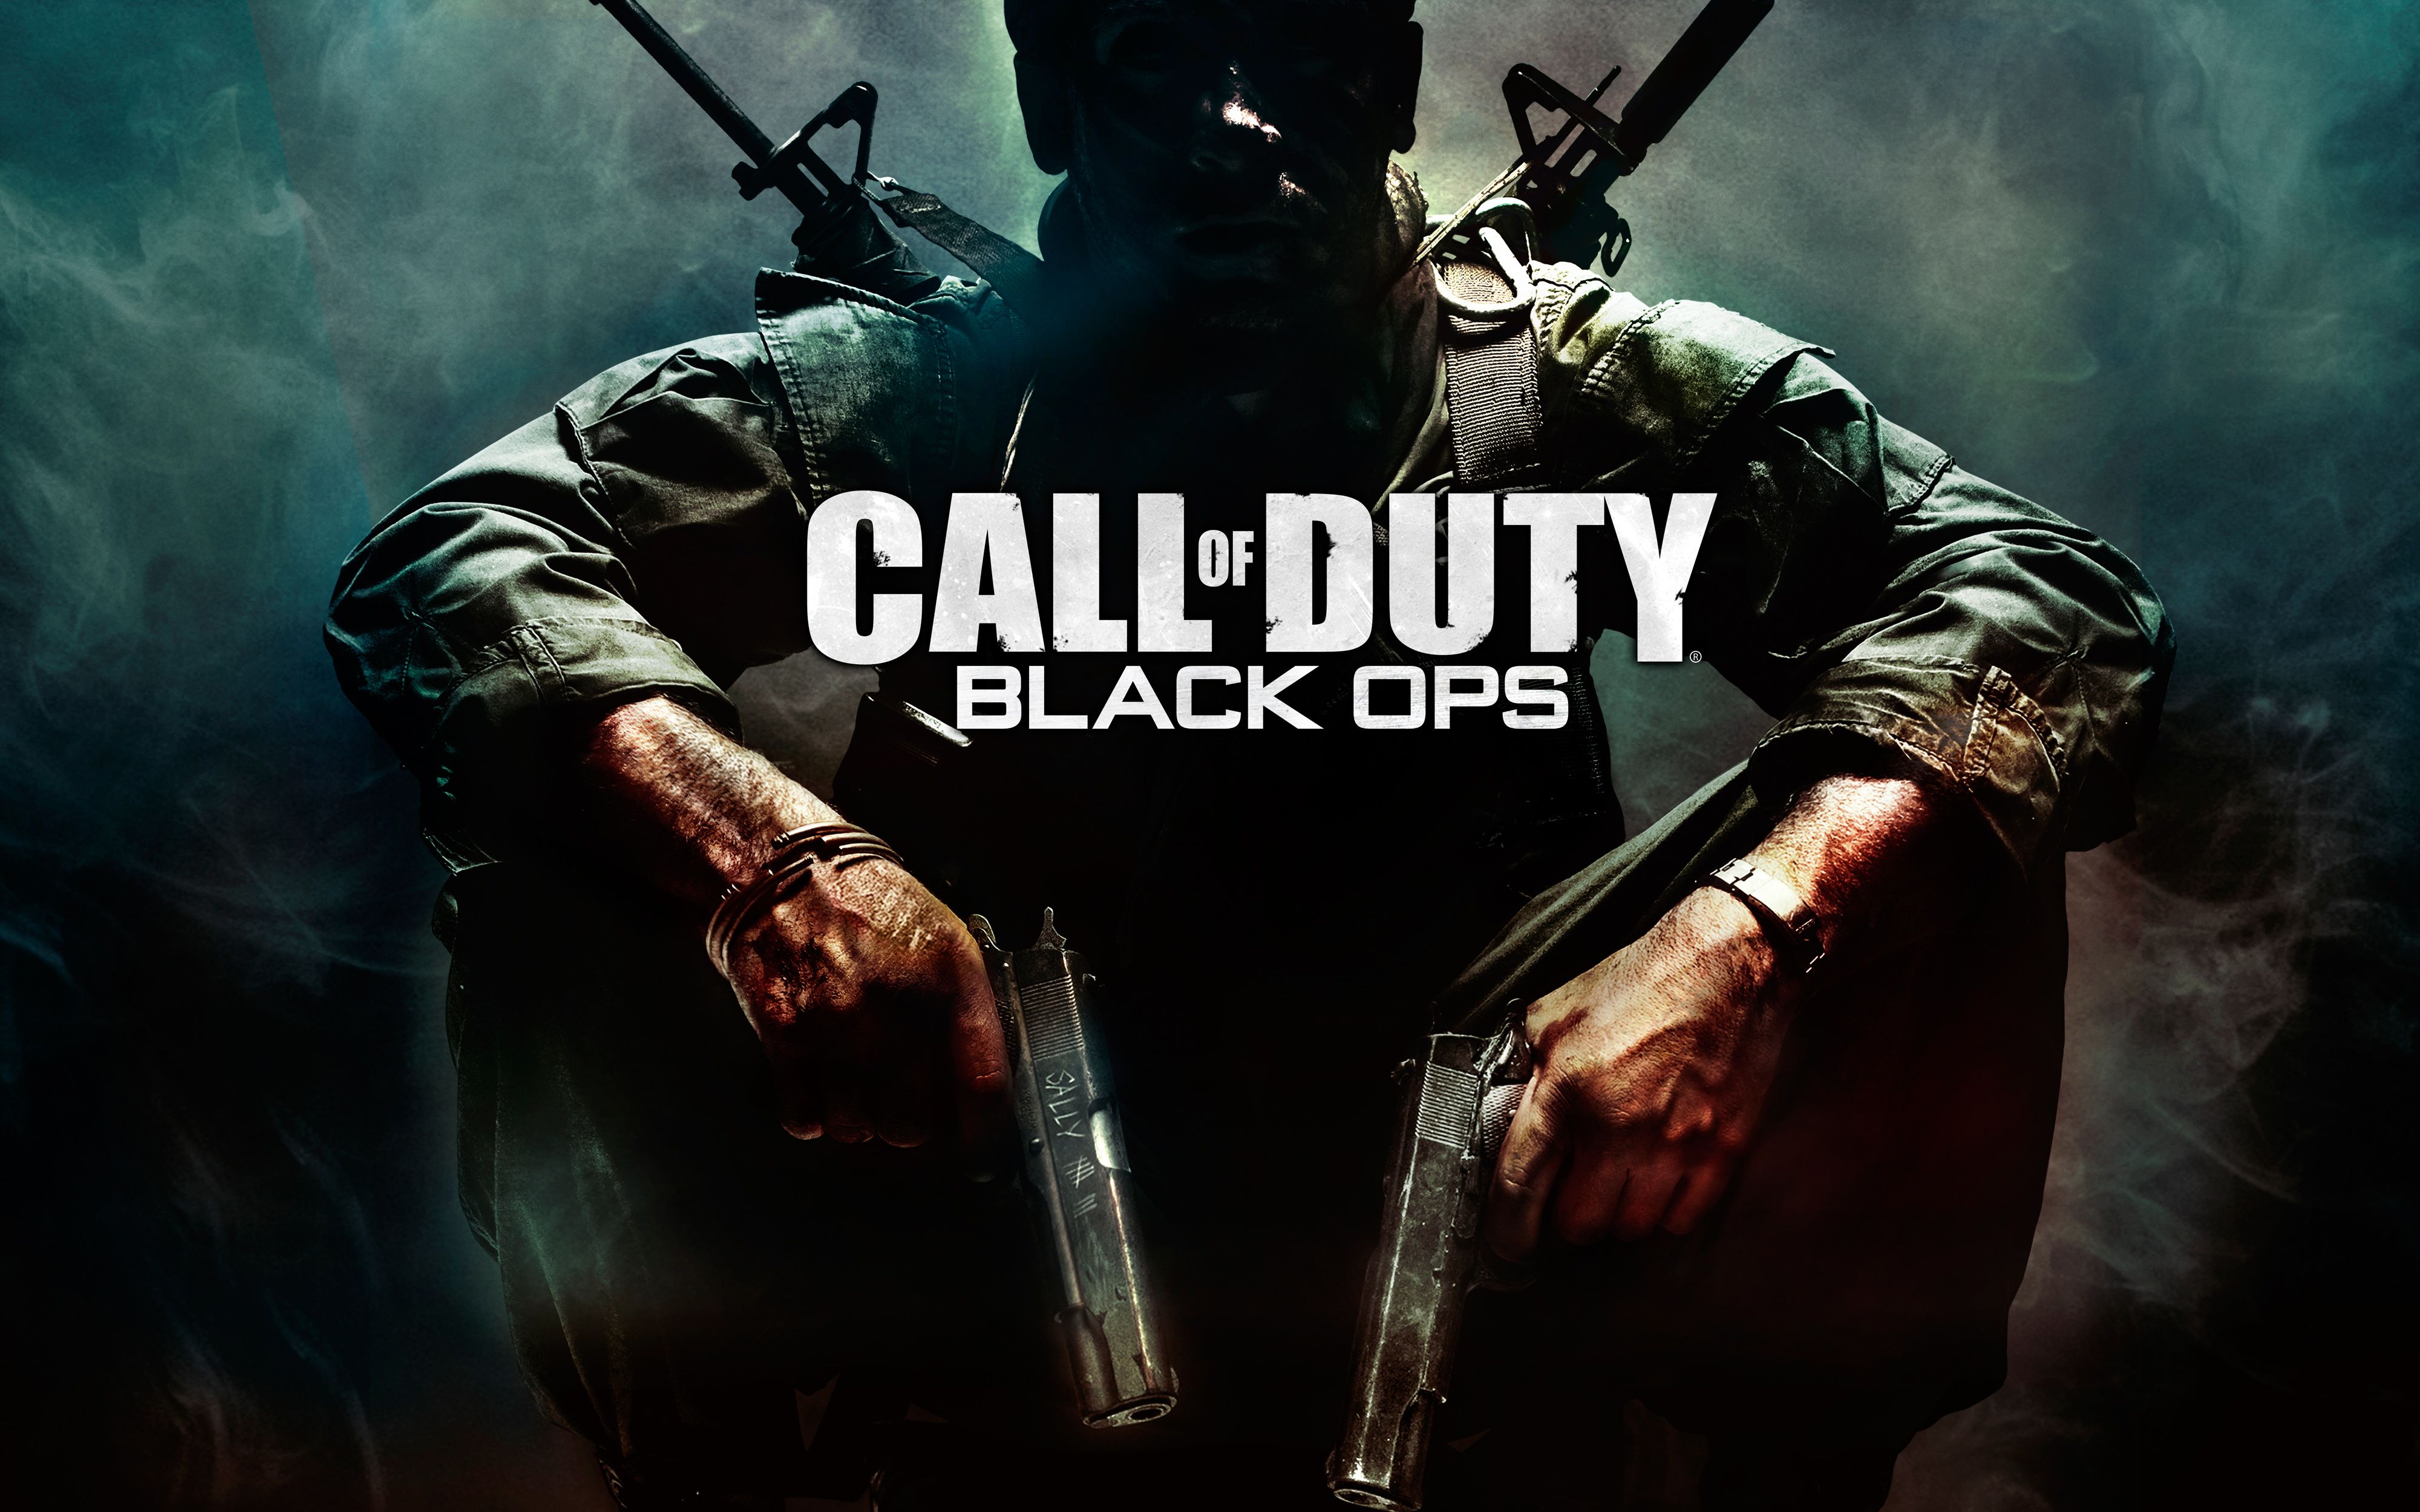 Call of Duty Black Ops 2 Wallpaper Free Call of Duty Black Ops 2 Background